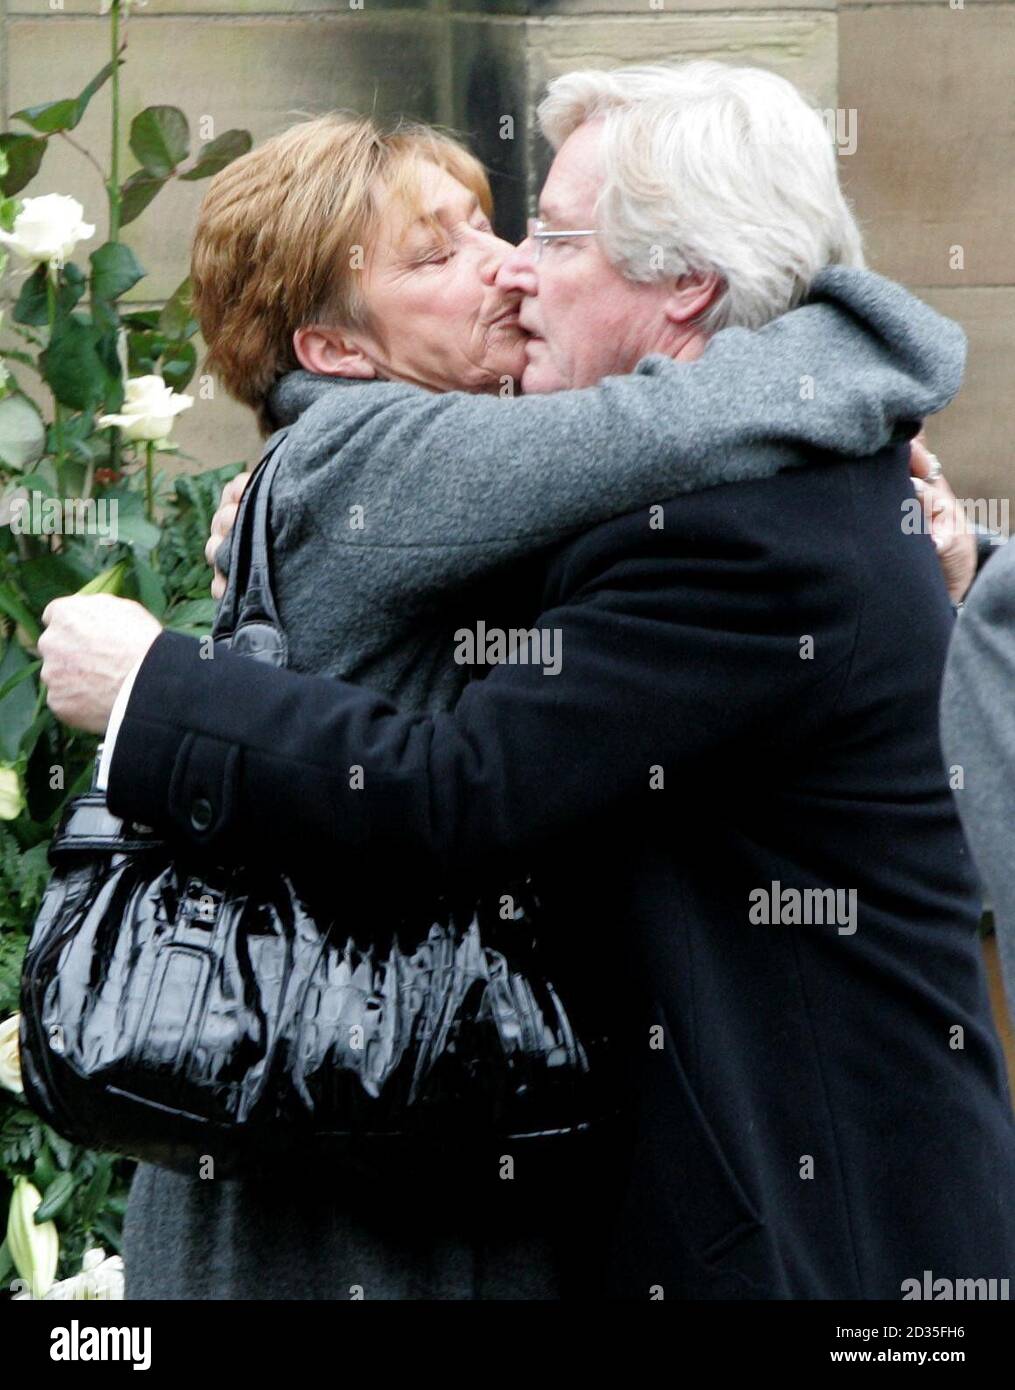 Coronation Street actress Anne Kirkbride kisses on screen husband Bill Roache after a memorial service for his wife Sara, at St Bartholomew's Church, Wilmslow, Cheshire. Stock Photo